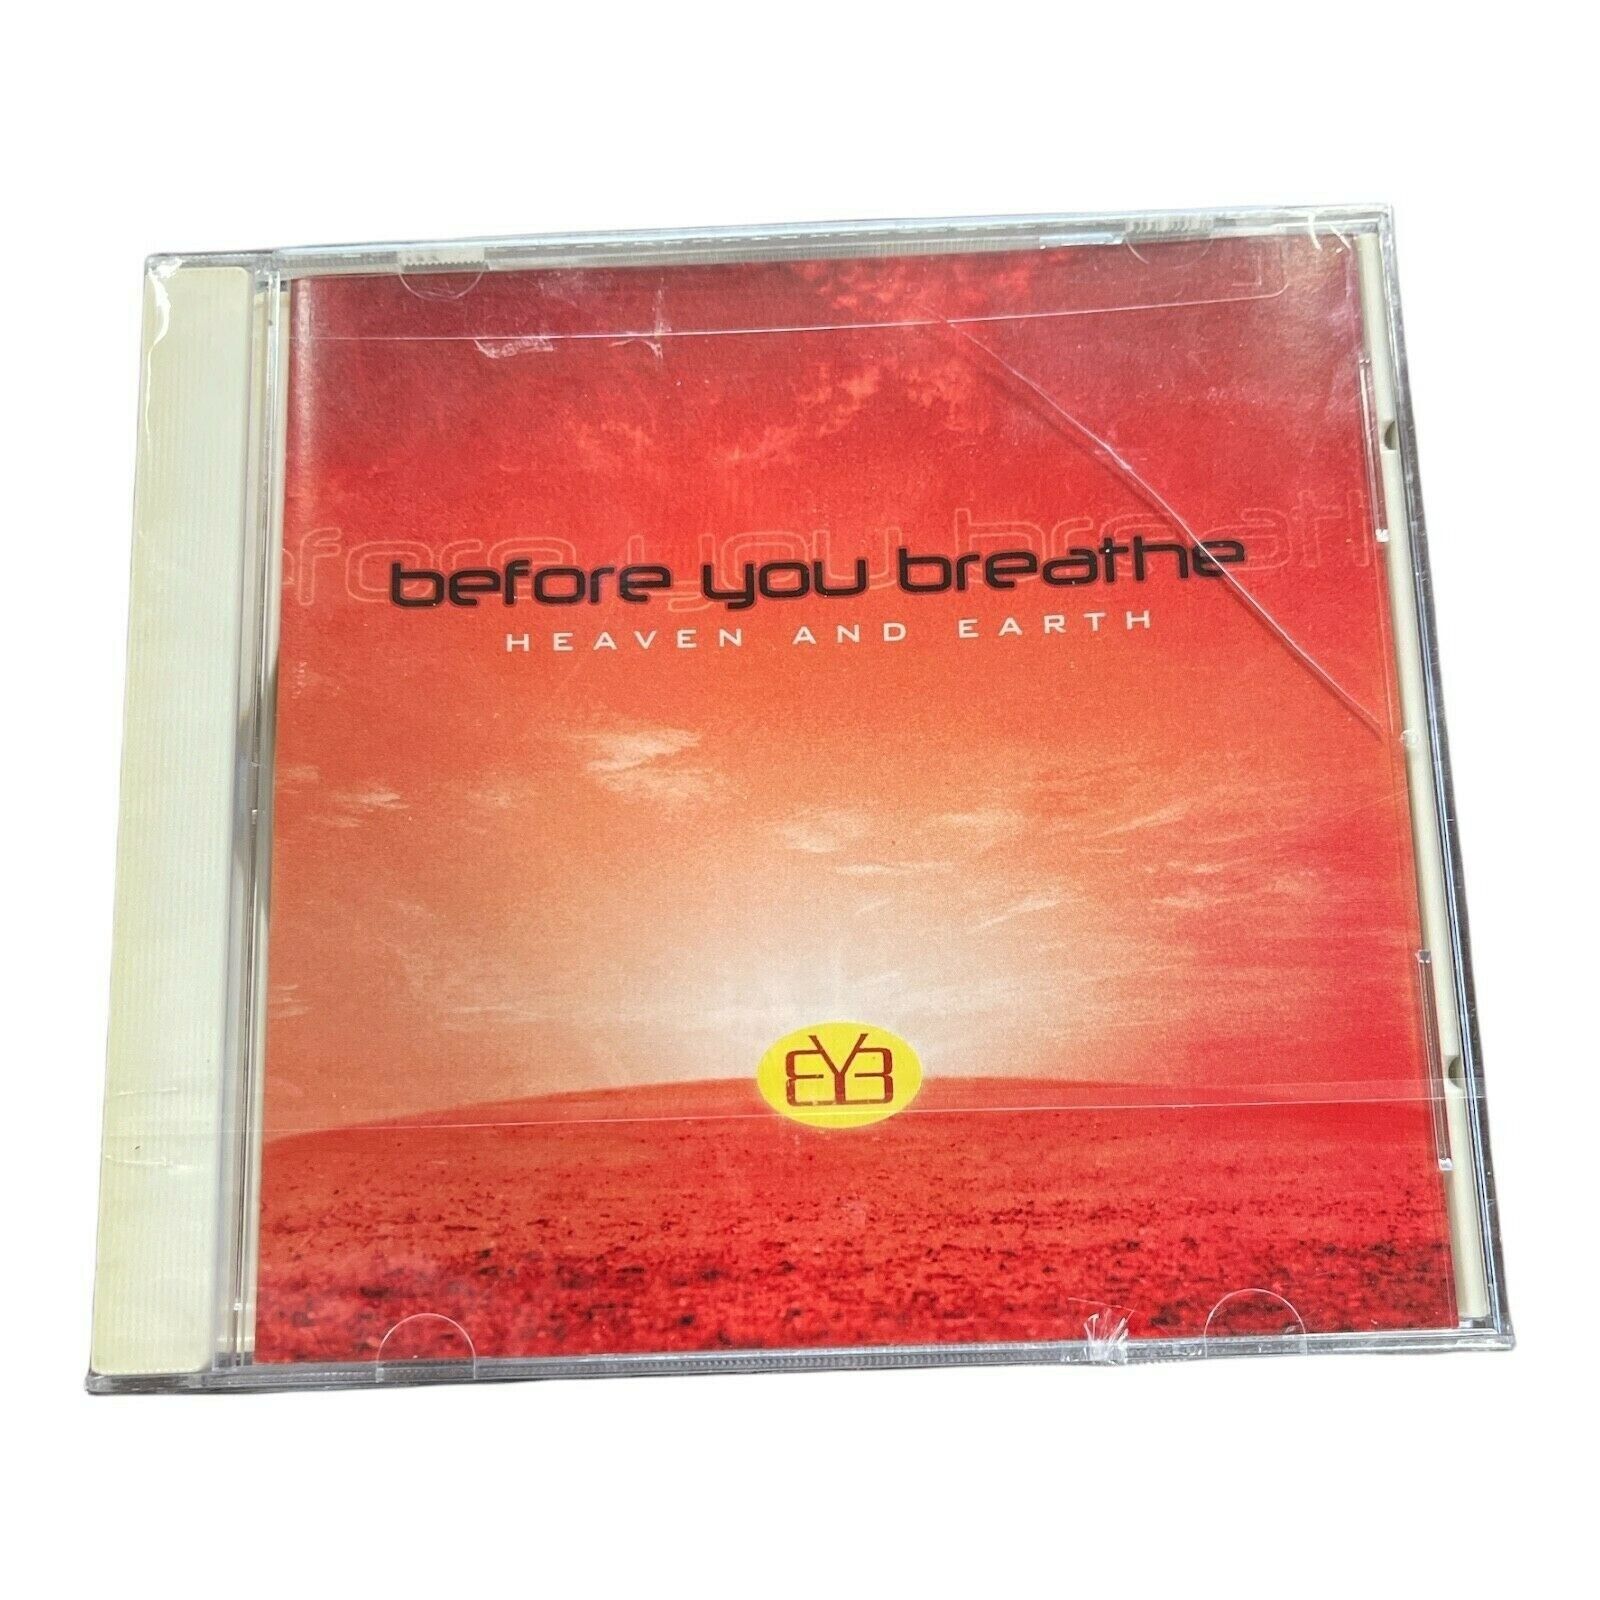 Primary image for Heaven & Earth by Before You Breathe CD 2002 Contemporary Religious Worship